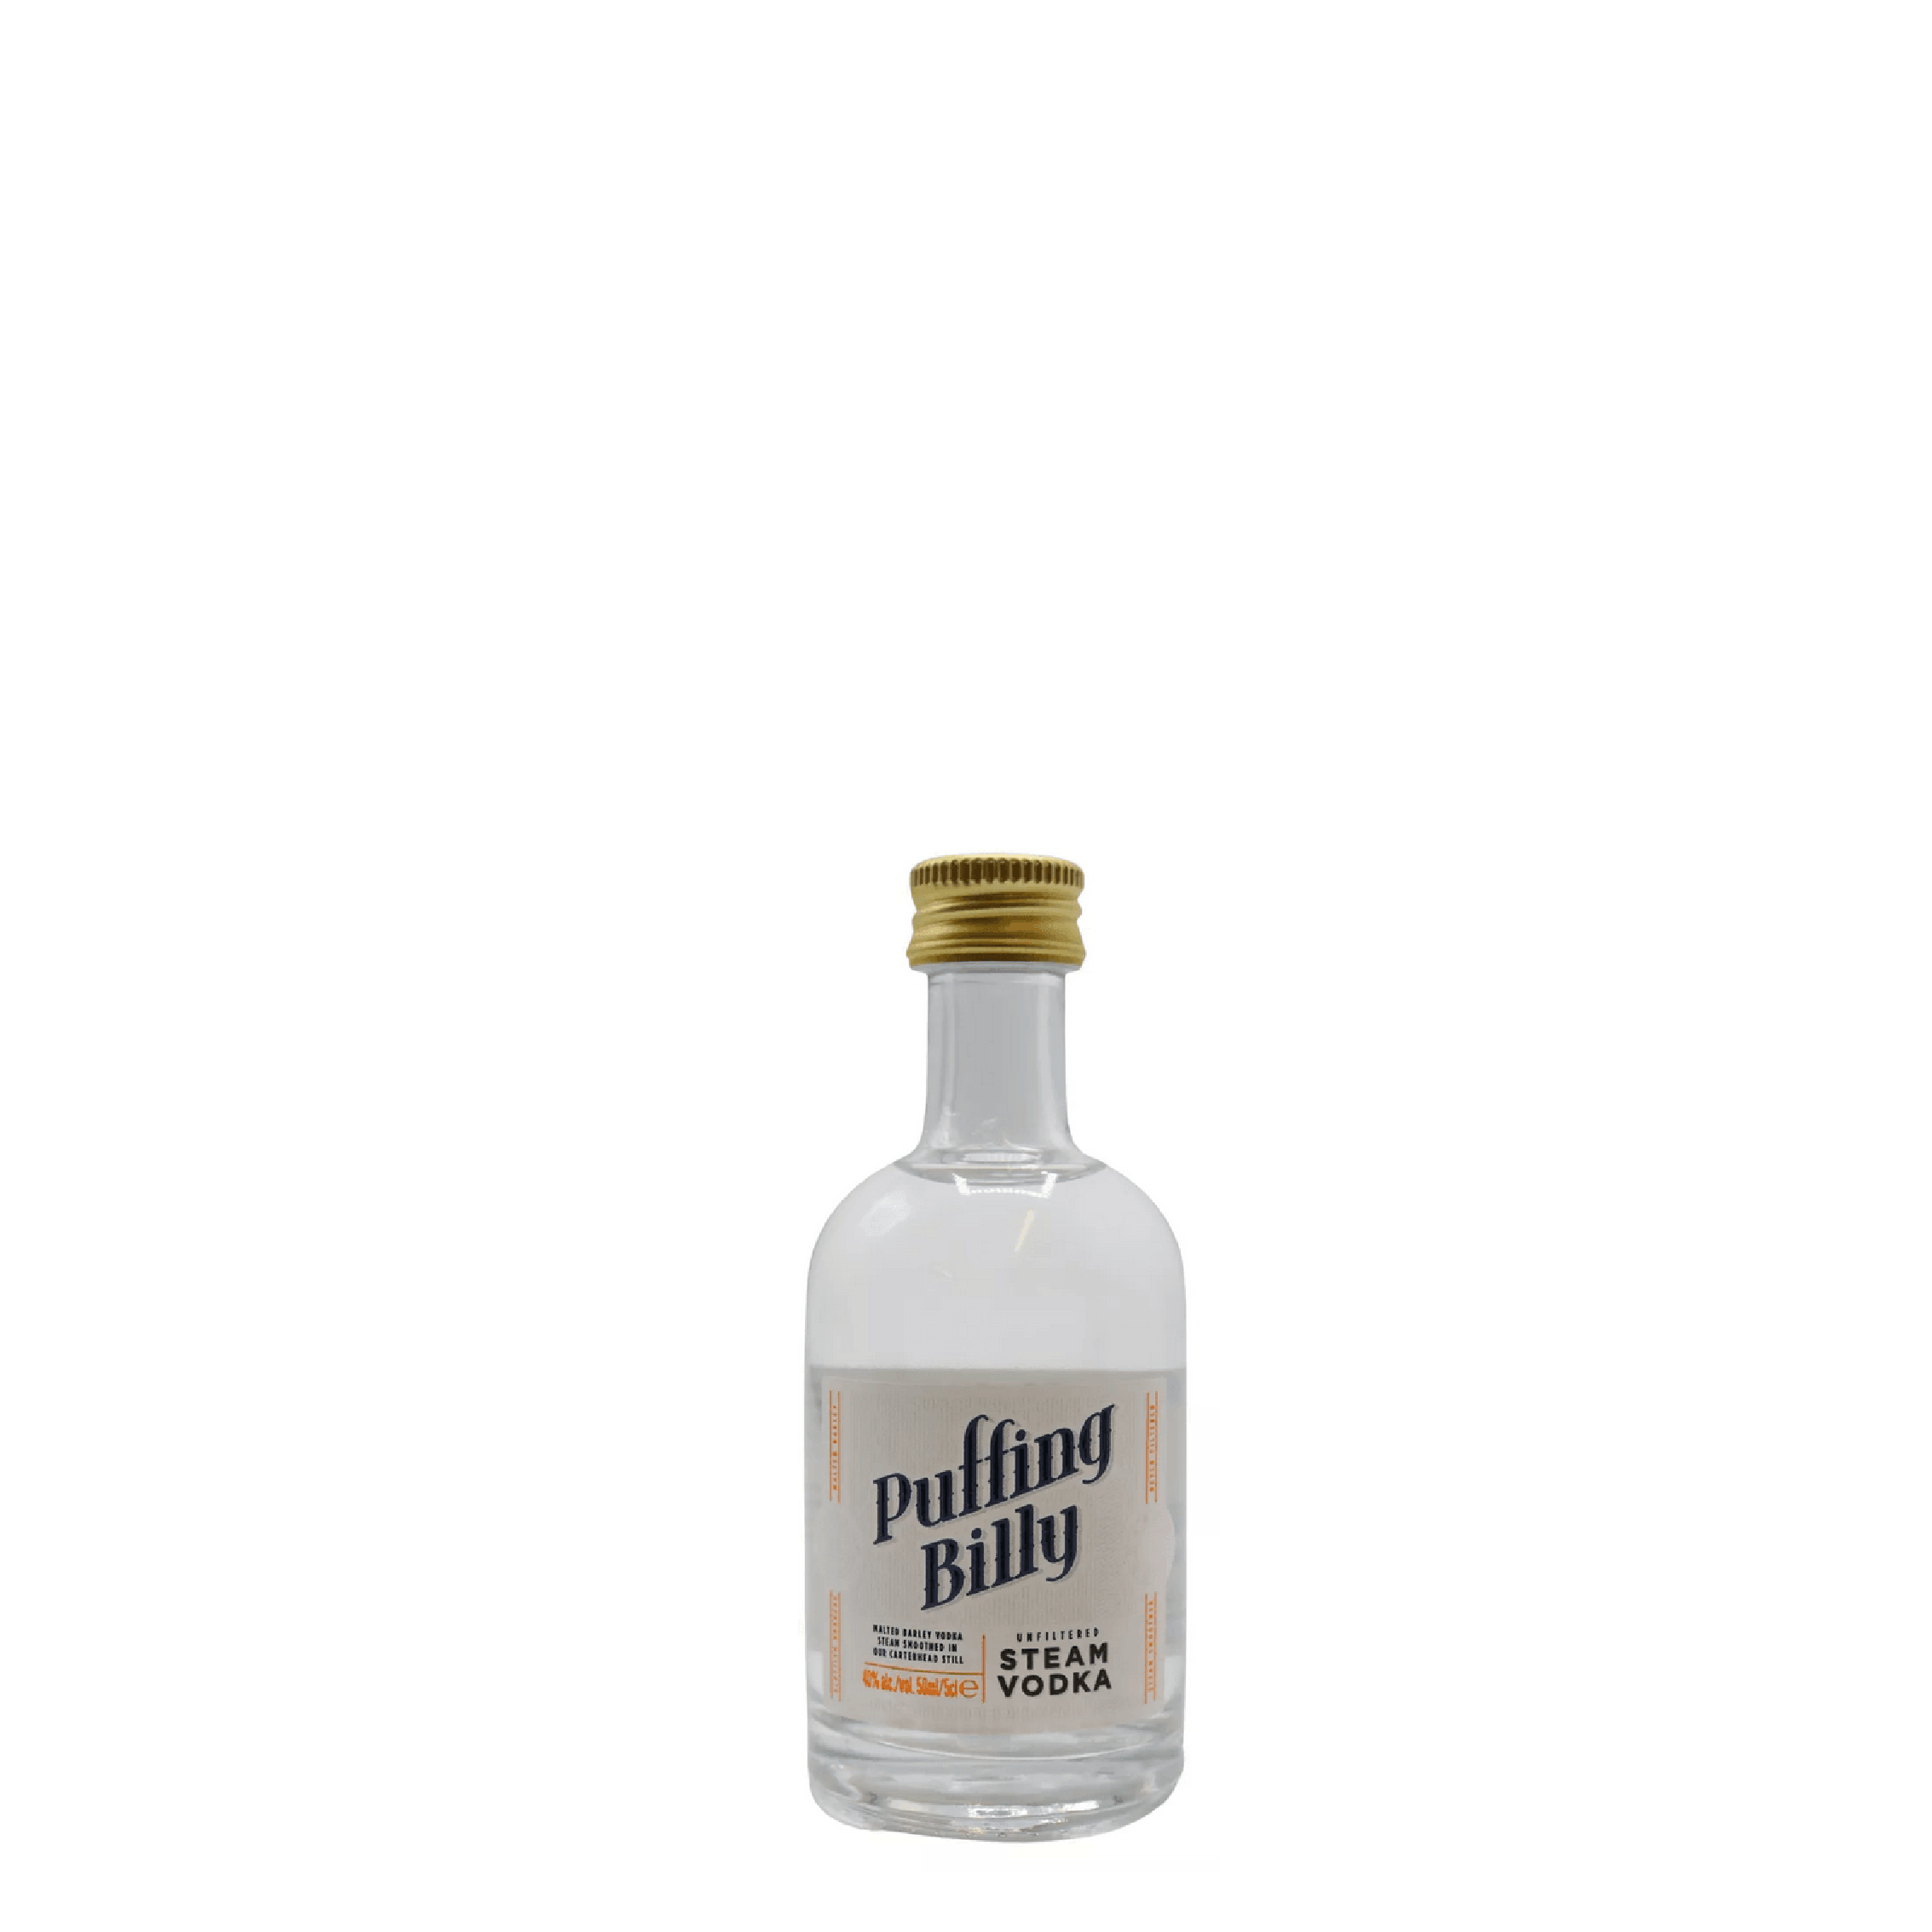 Puffing Billy Vodka, 5cl - Miniature